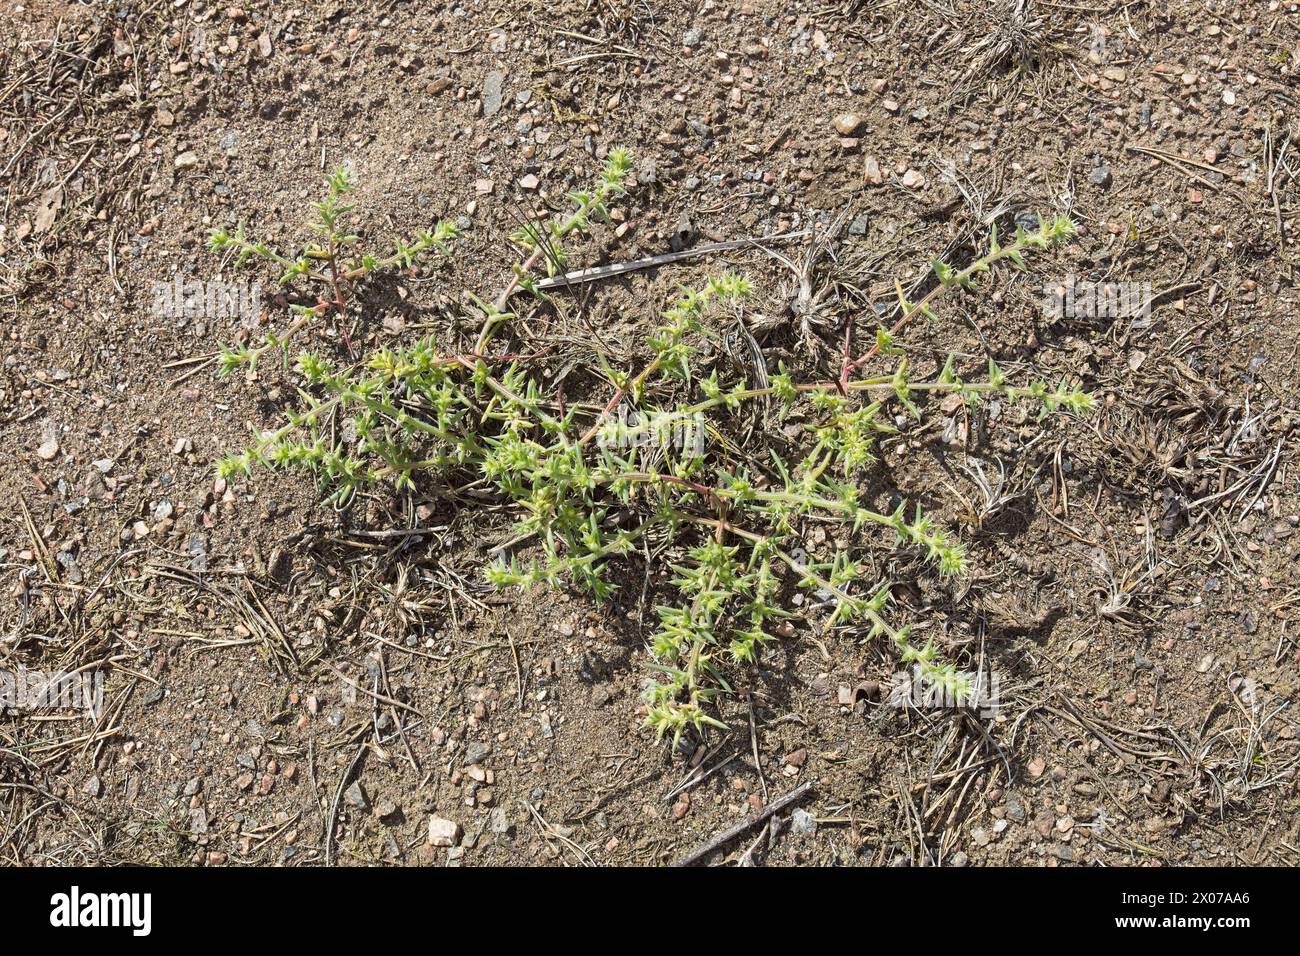 Closeup of prickly saltwort or prickly glasswort (Salsola kali) growing in sandy coastal soil on the island of Jussarö in summer, Rasepori, Finland. Stock Photo